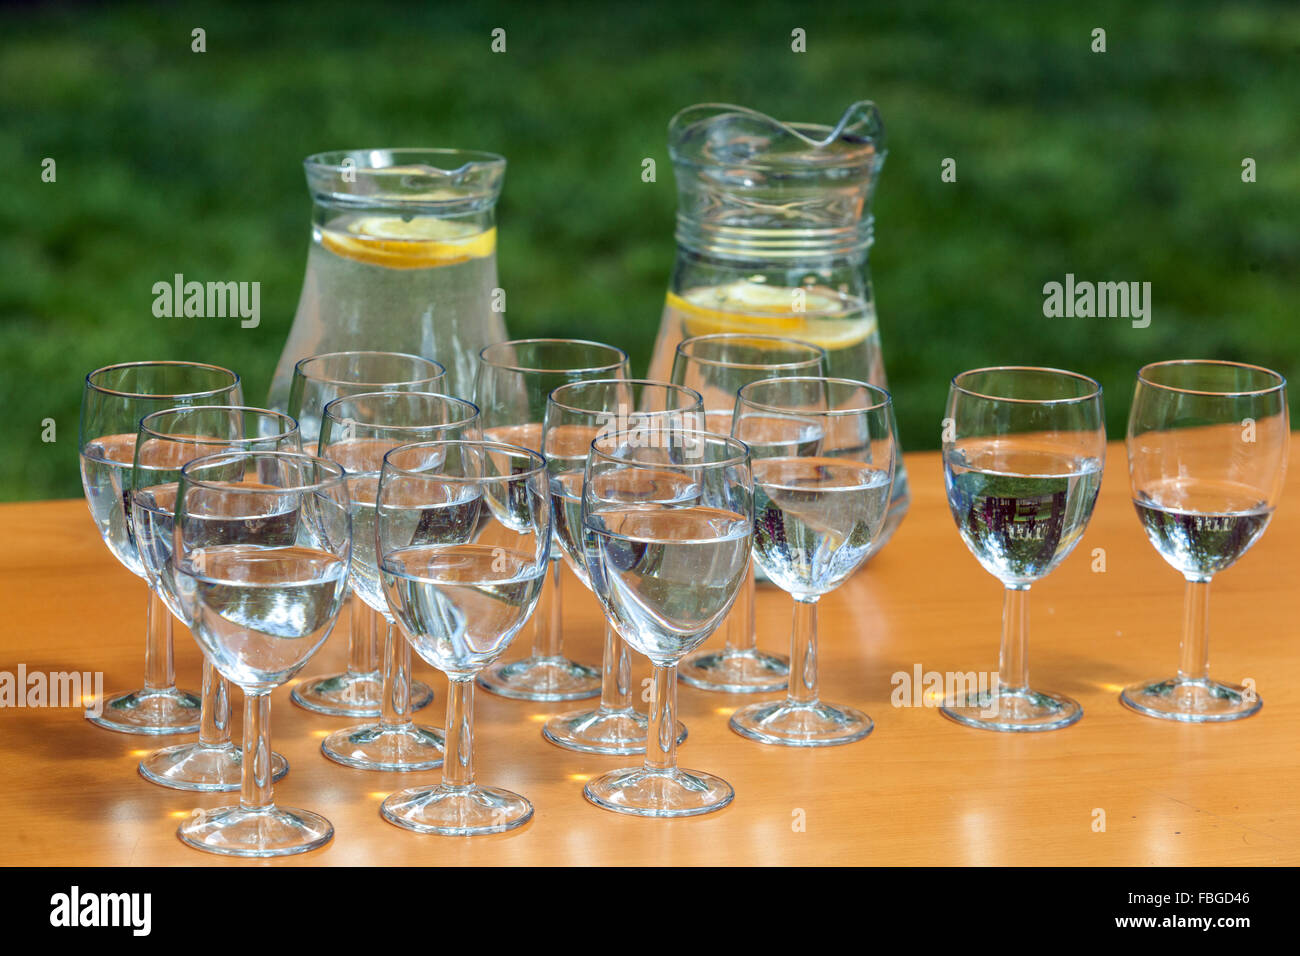 The two carafes of fresh lemon-flavored water and glasses on a table in the garden Stock Photo